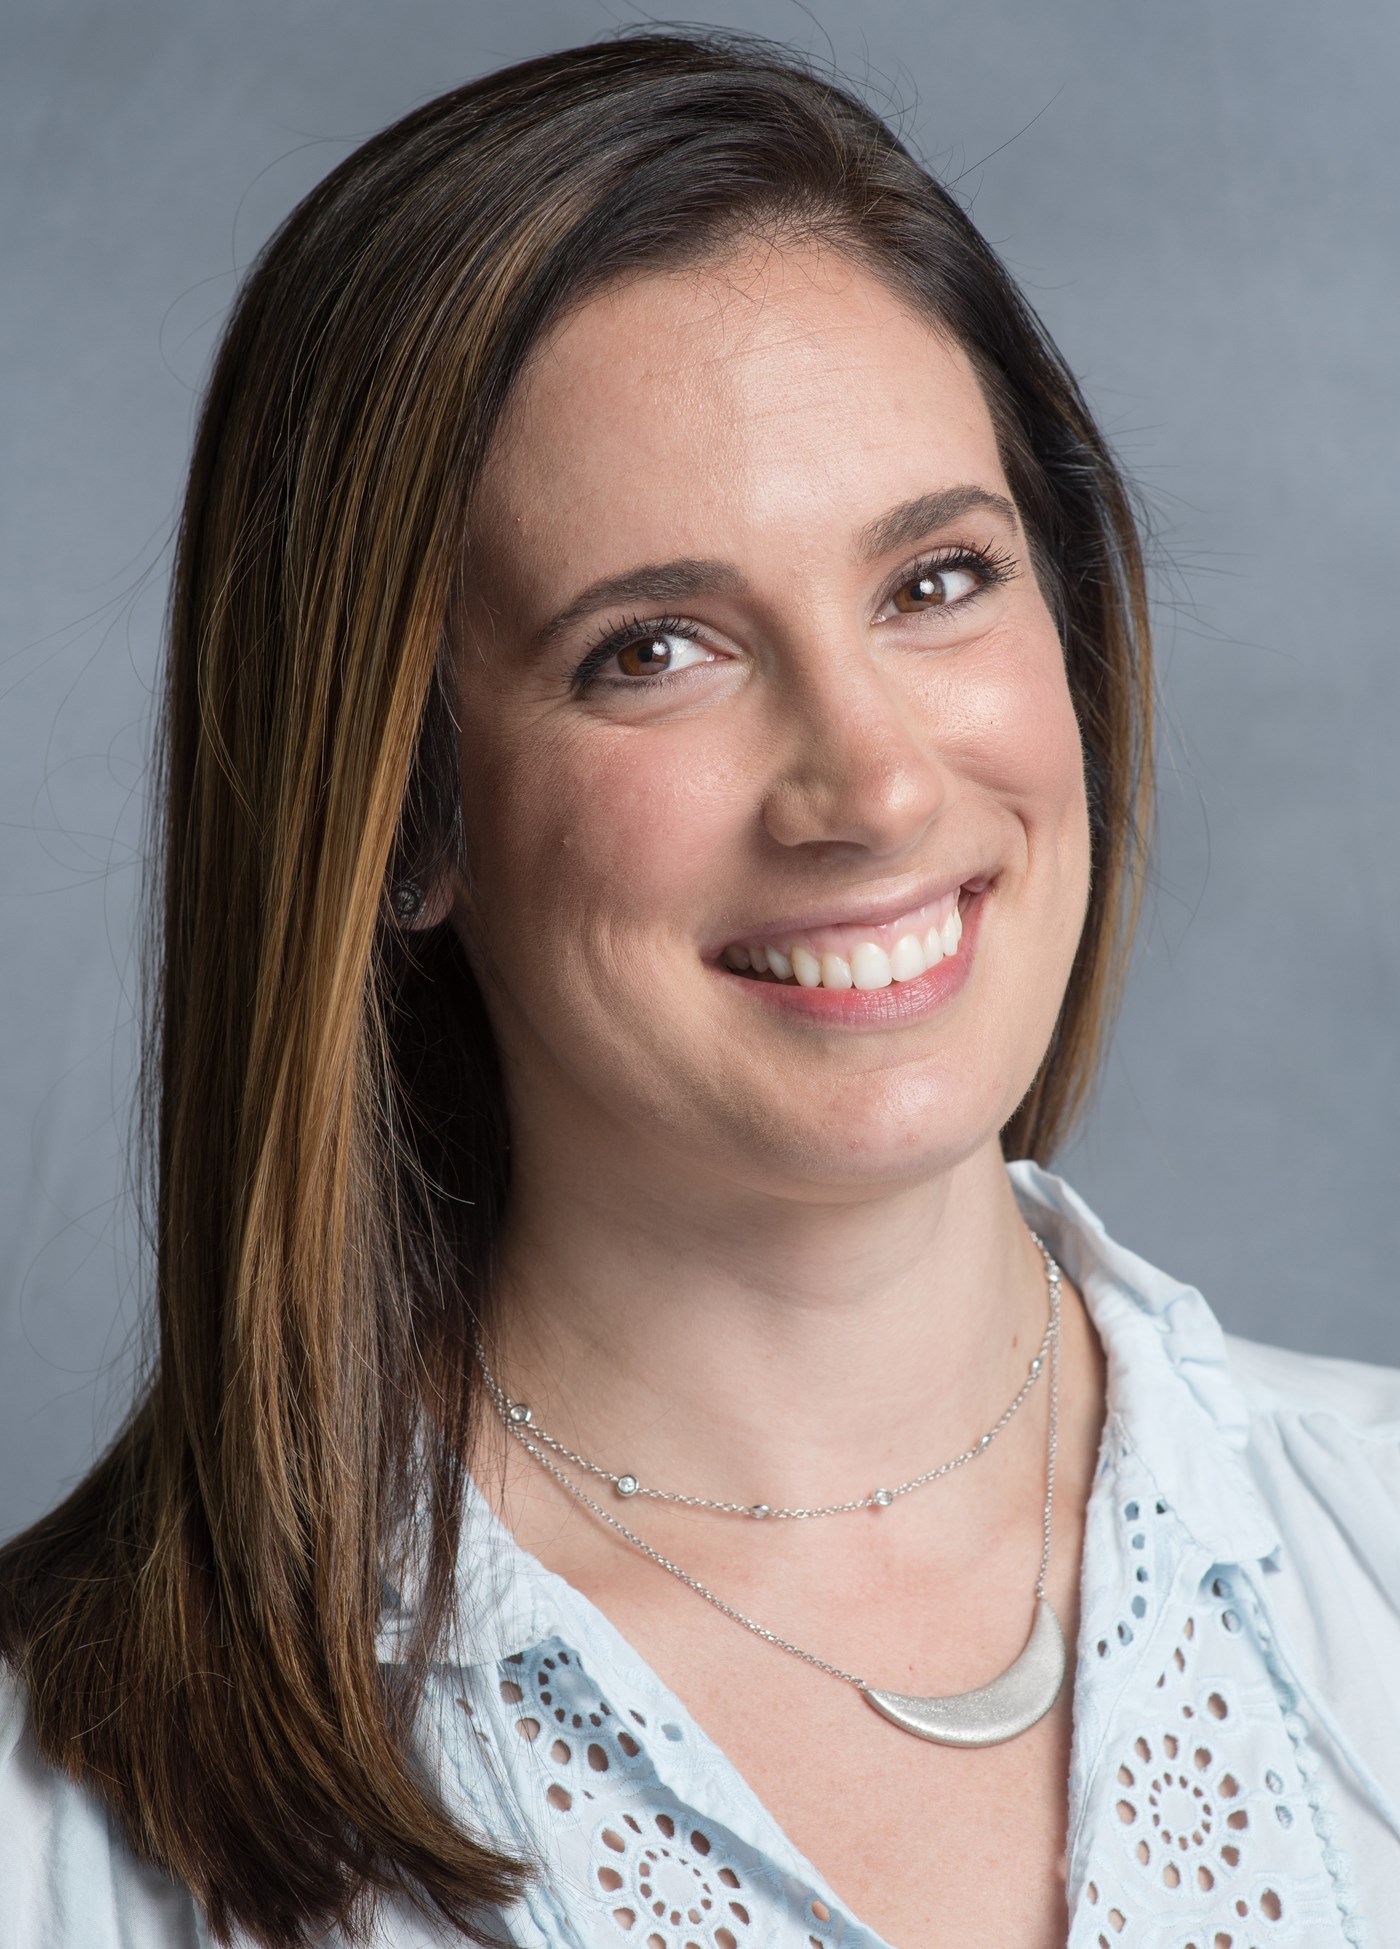 Jenna Petrillo is the Subcontracts Administrator in the office of Research Administration